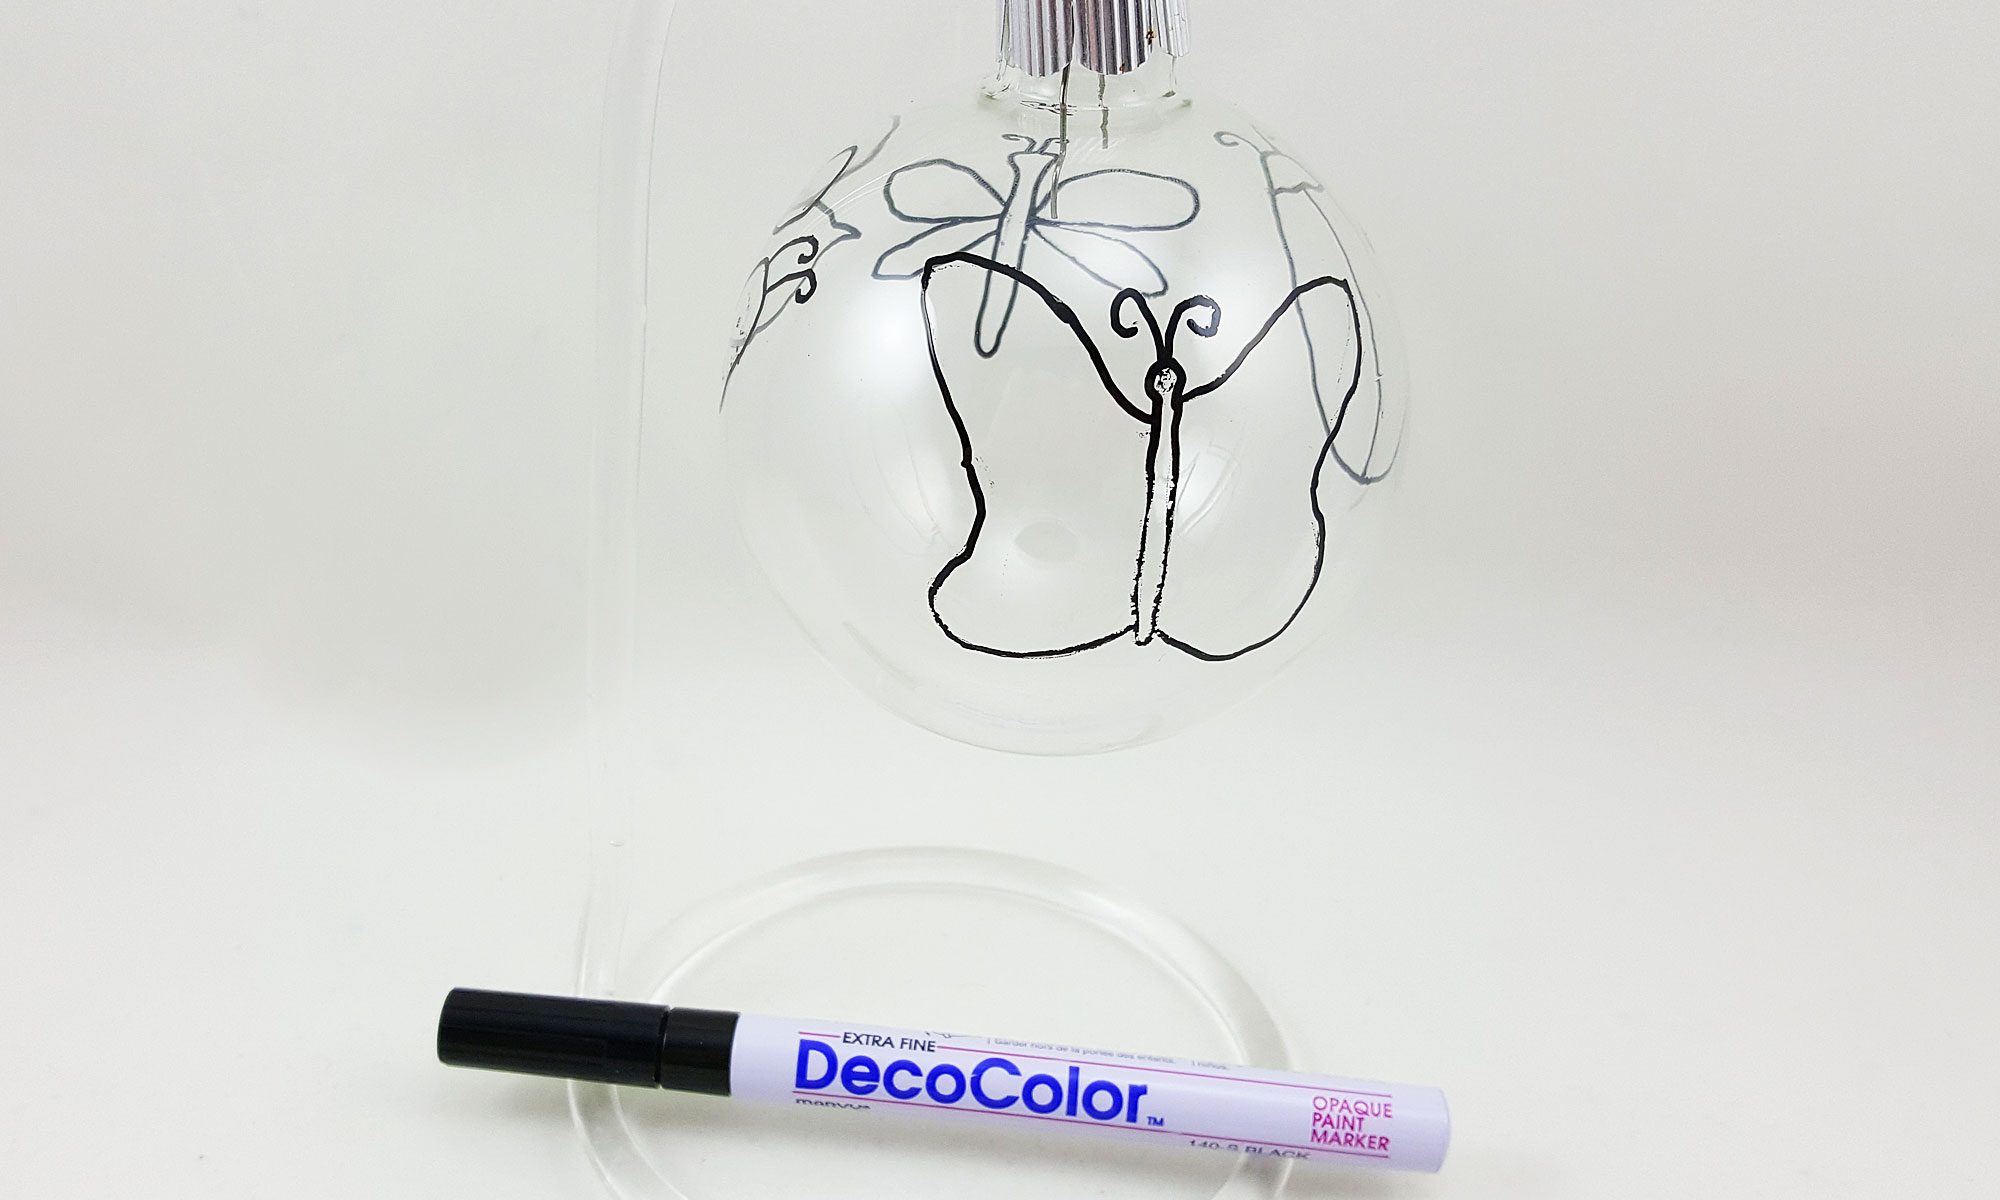 Step 1 is to outline your mosaic shapes on the clear class ball ornament | OrnamentShop.com